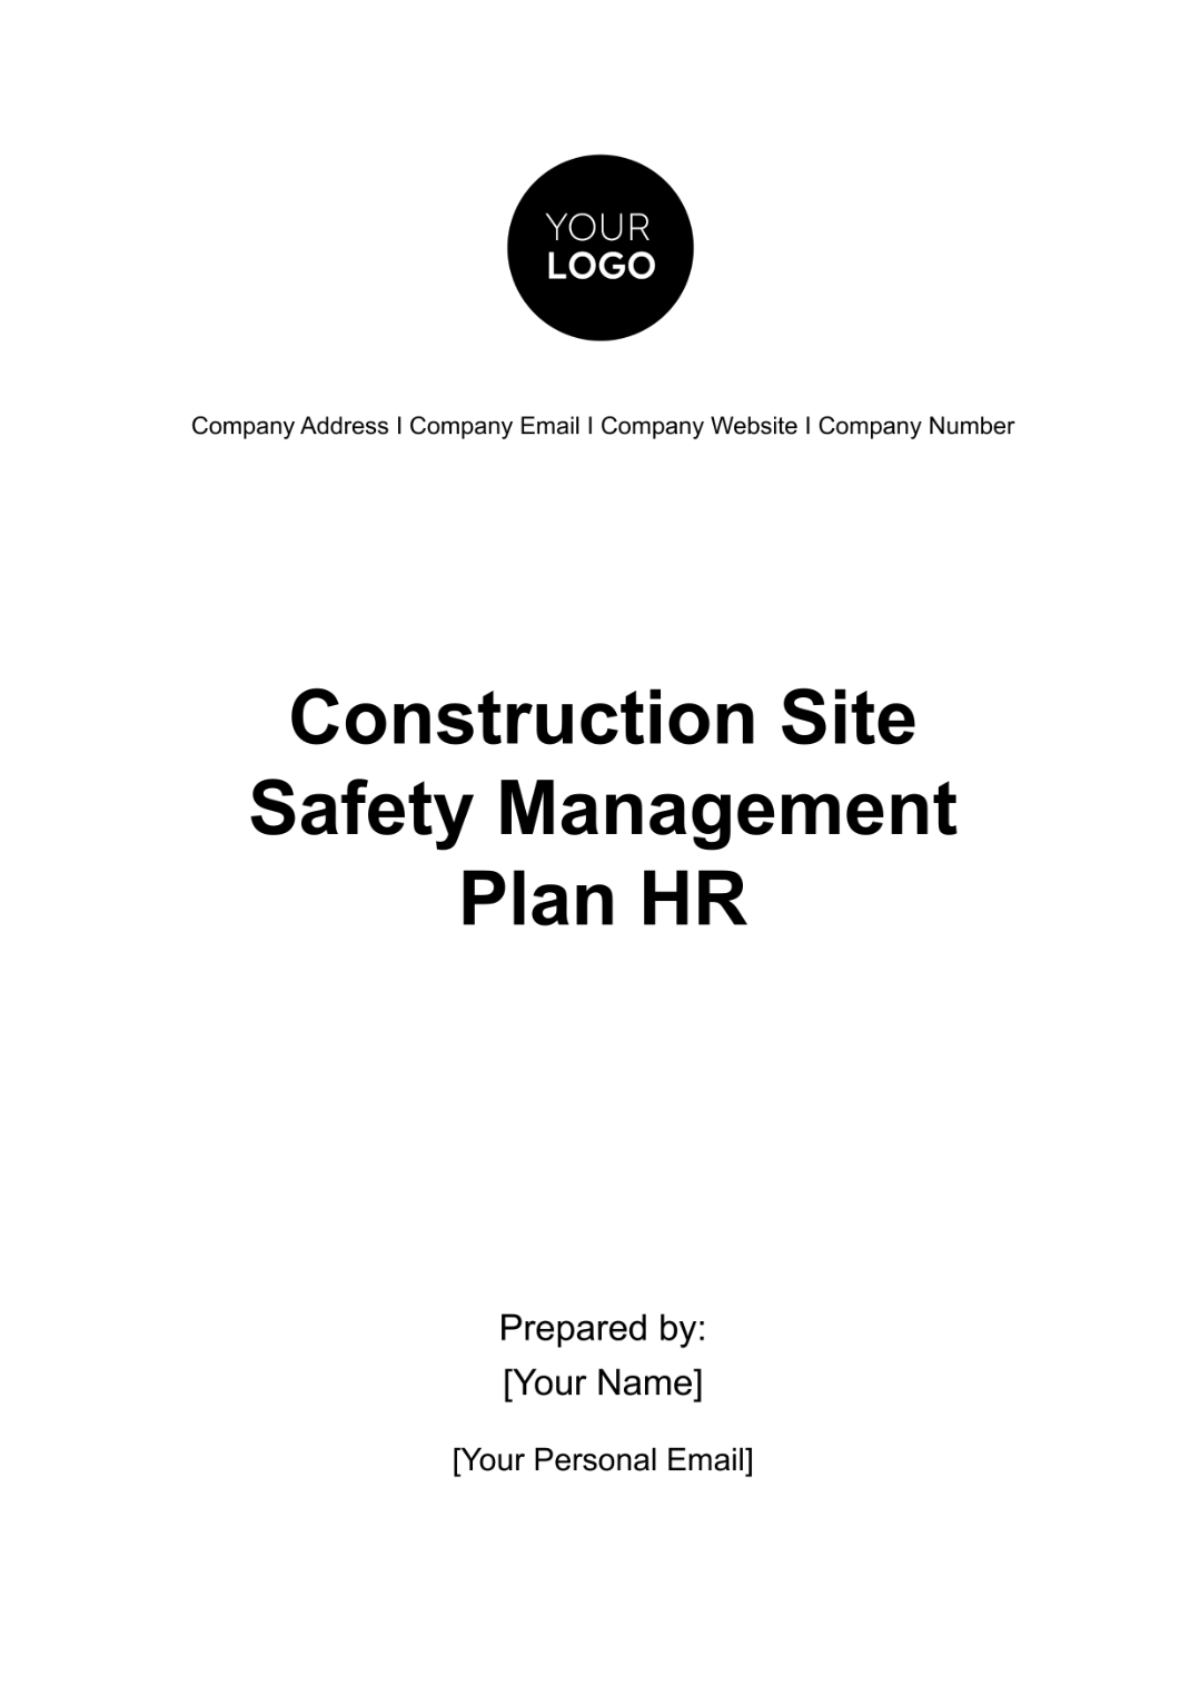 Free Construction Site Safety Management Plan HR Template